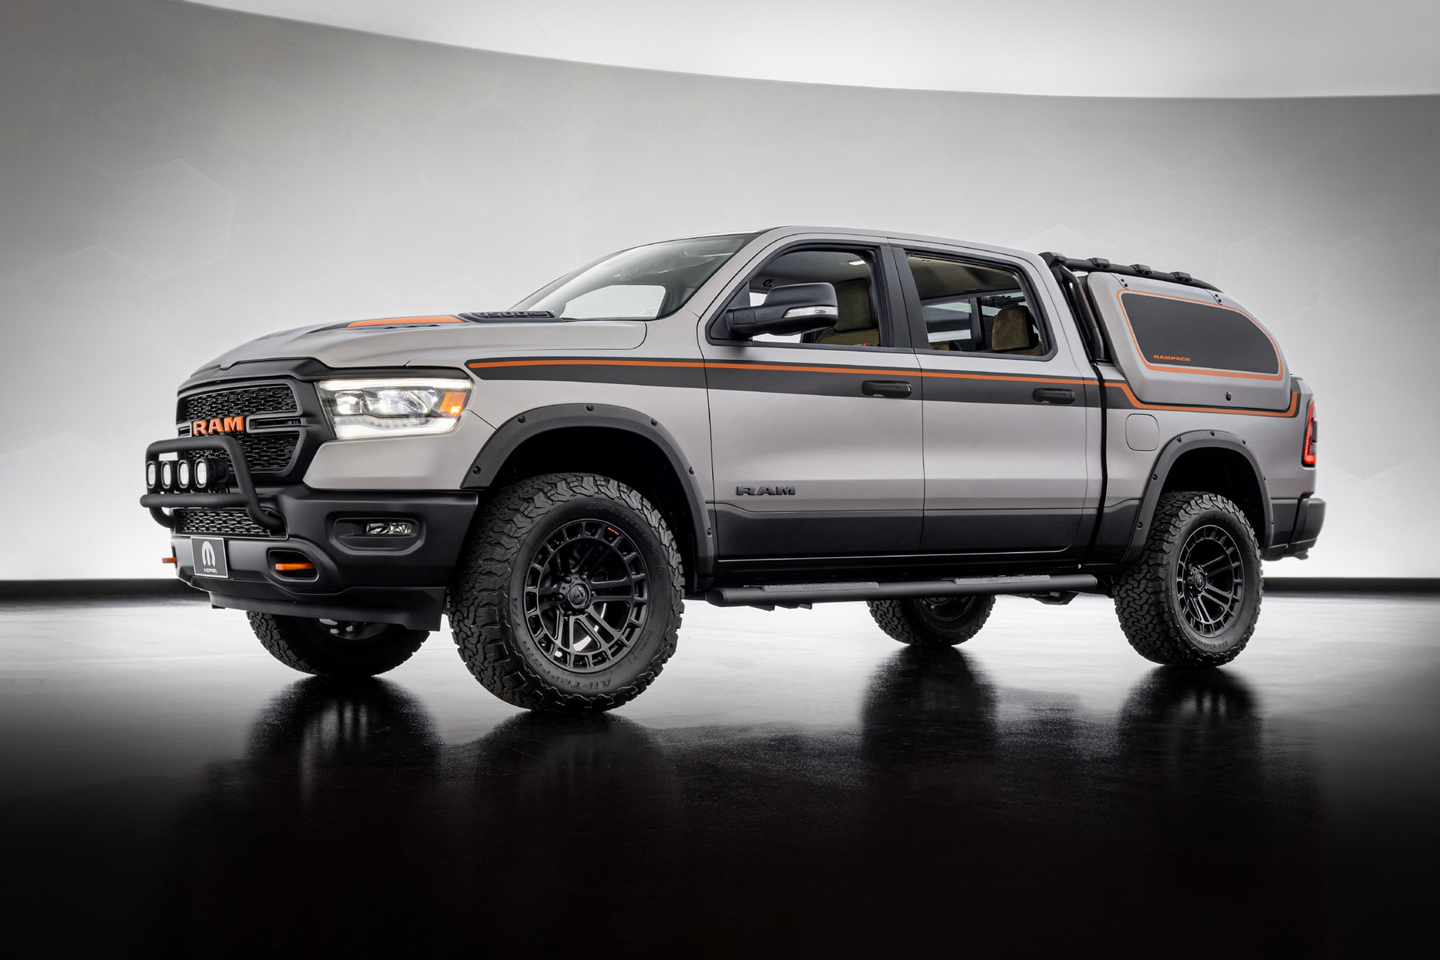 Behold the stupendous Ram 1500 Backcountry X